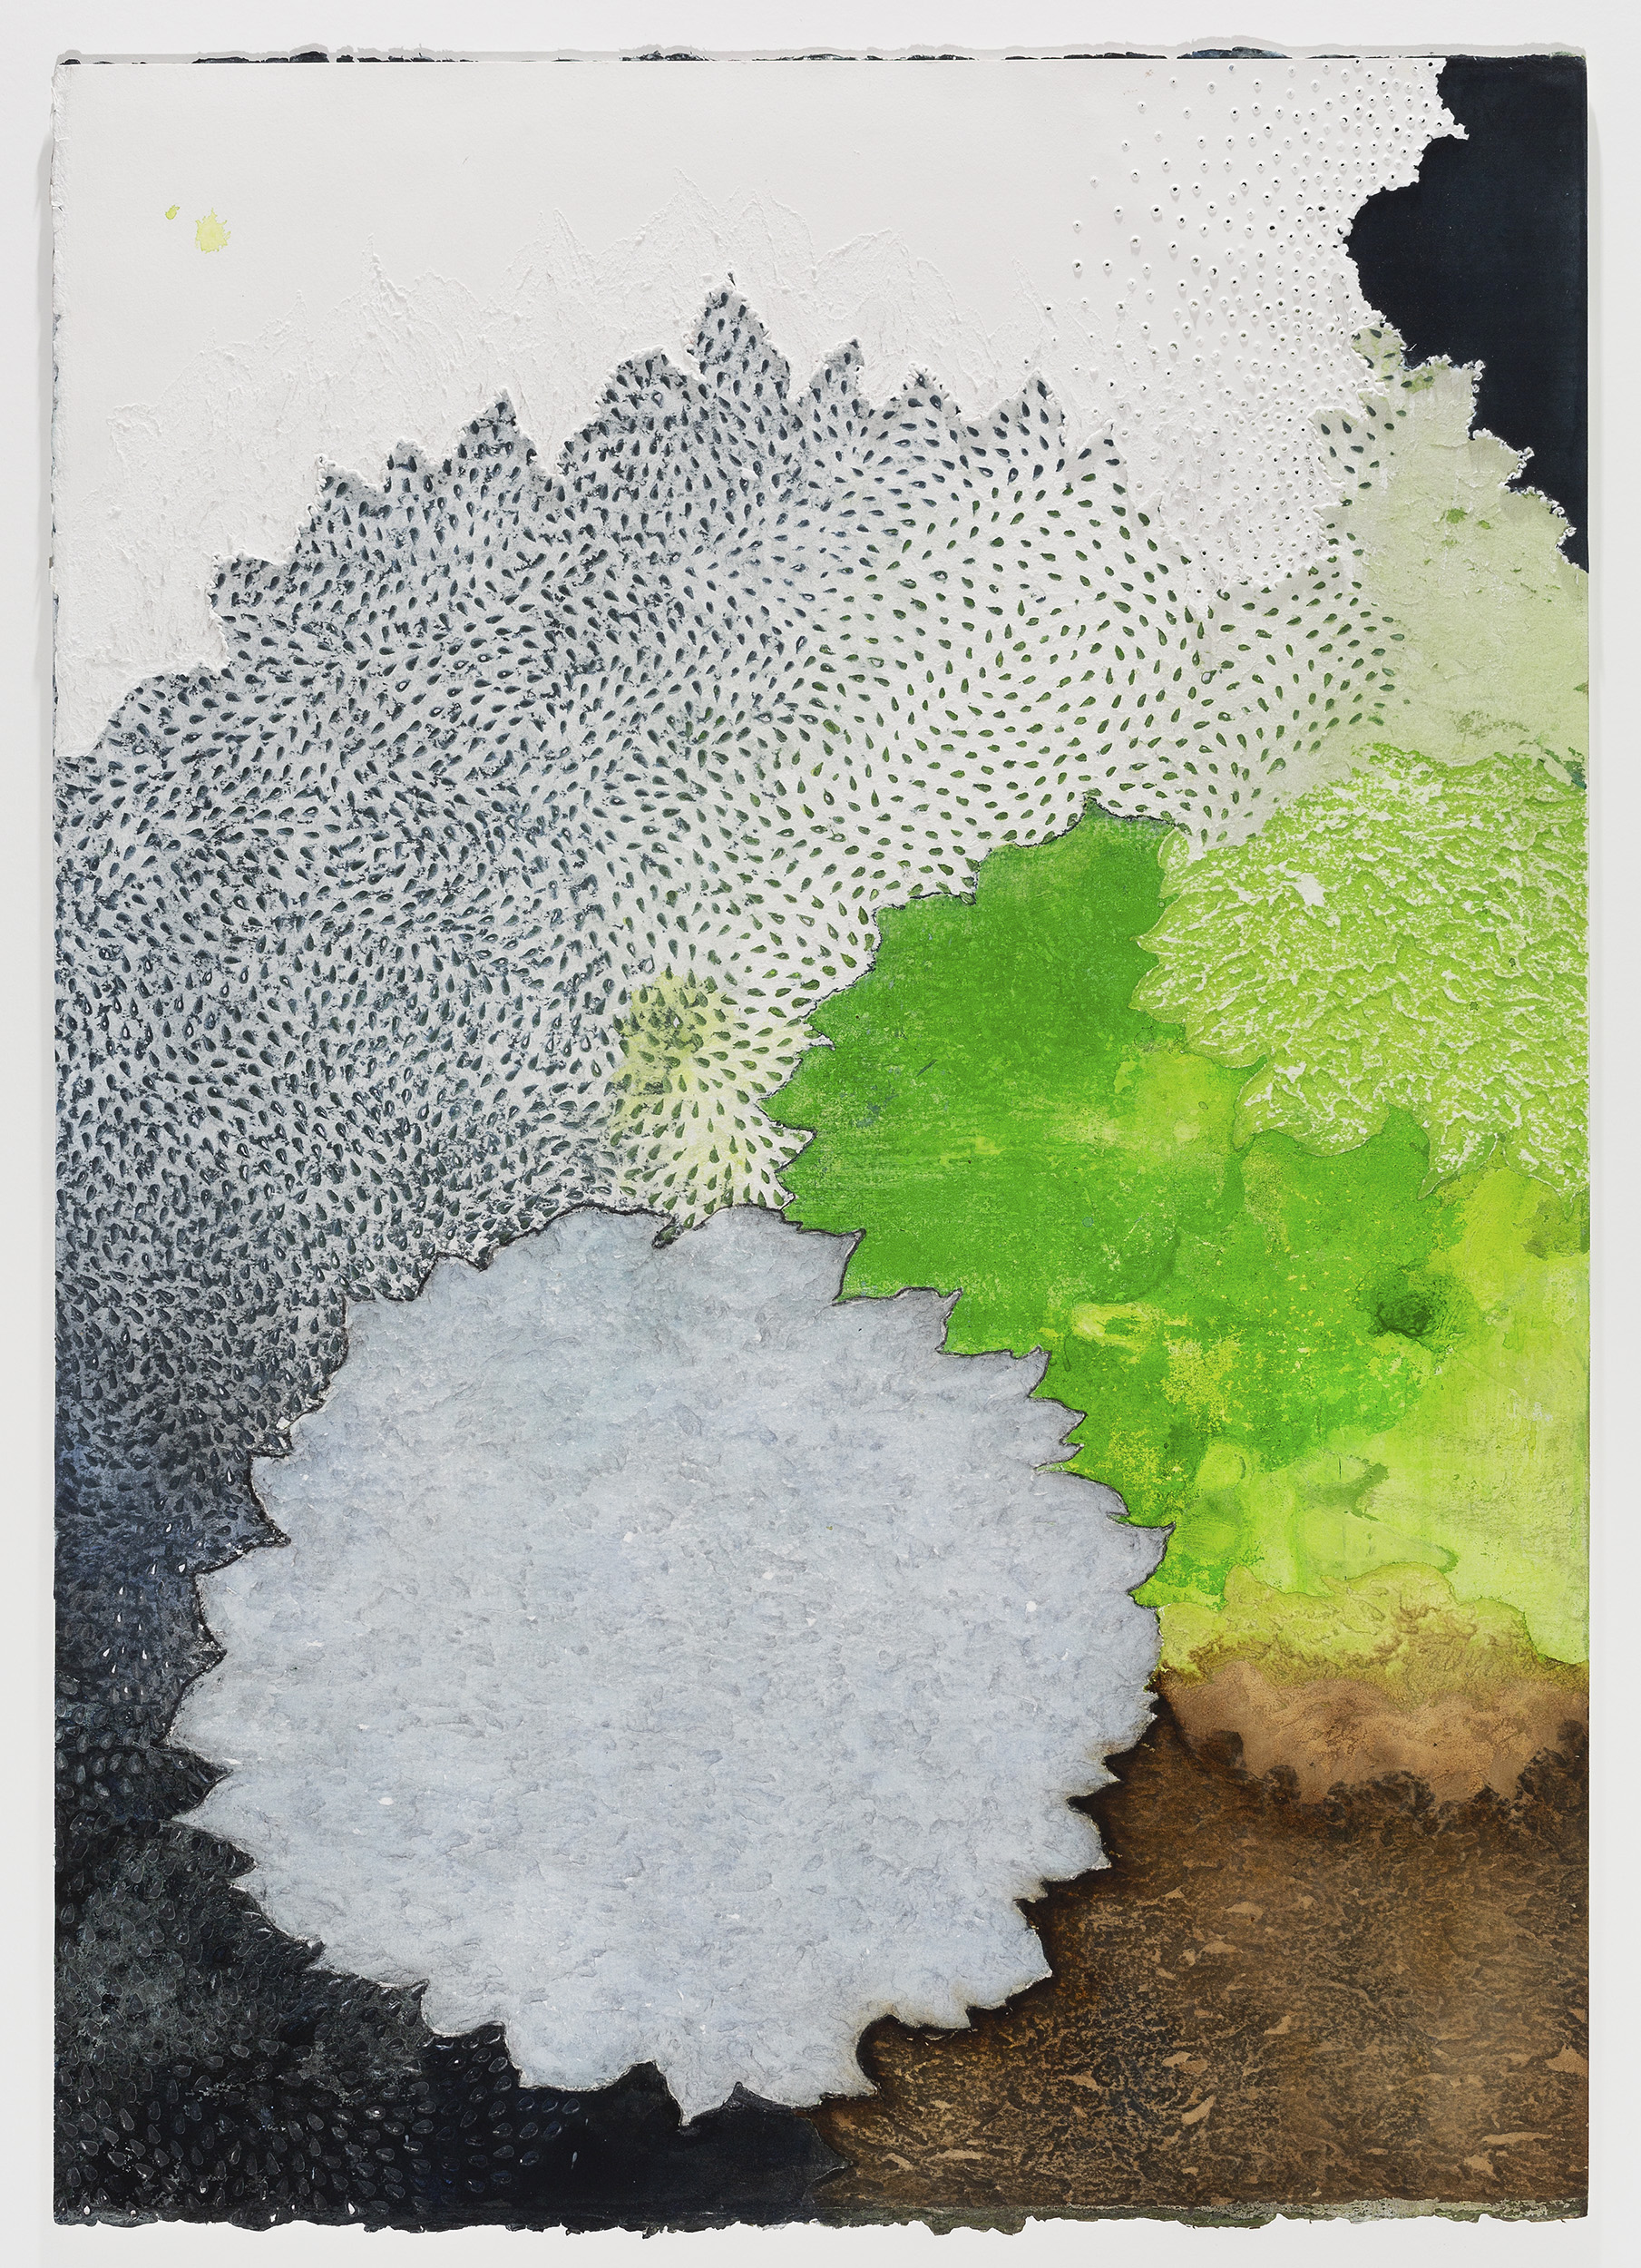 Melinda Schawel Undergrowth 3 mixed media on torn and perforated paper assemblage 105 x 75cm $5,500